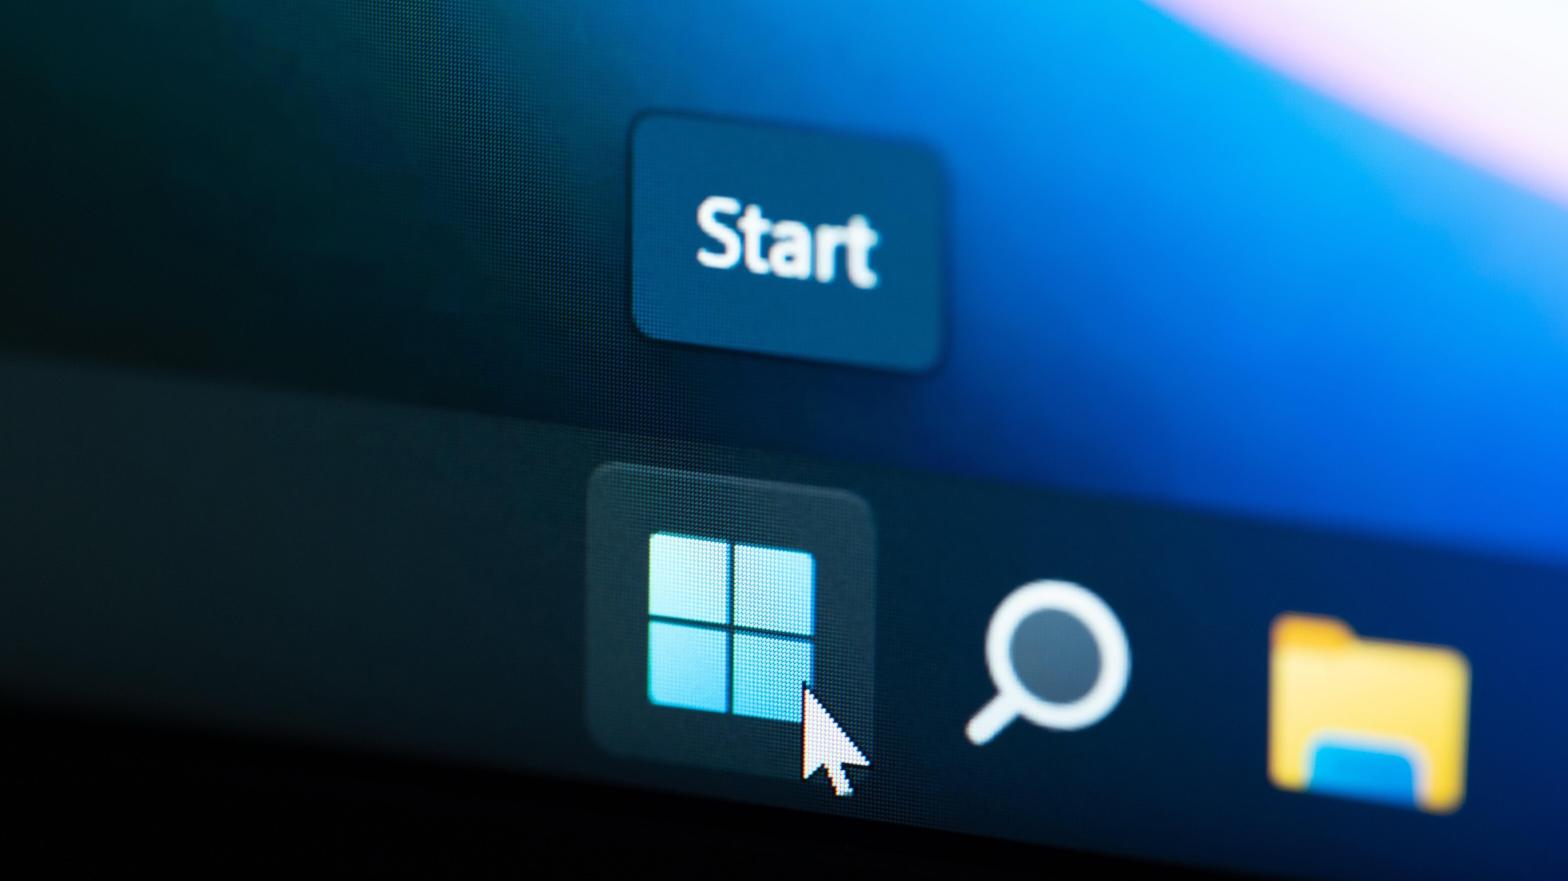 Some Windows 11 users will see a little promotion when they click on the Start button. (Image: PixieMe, Shutterstock)